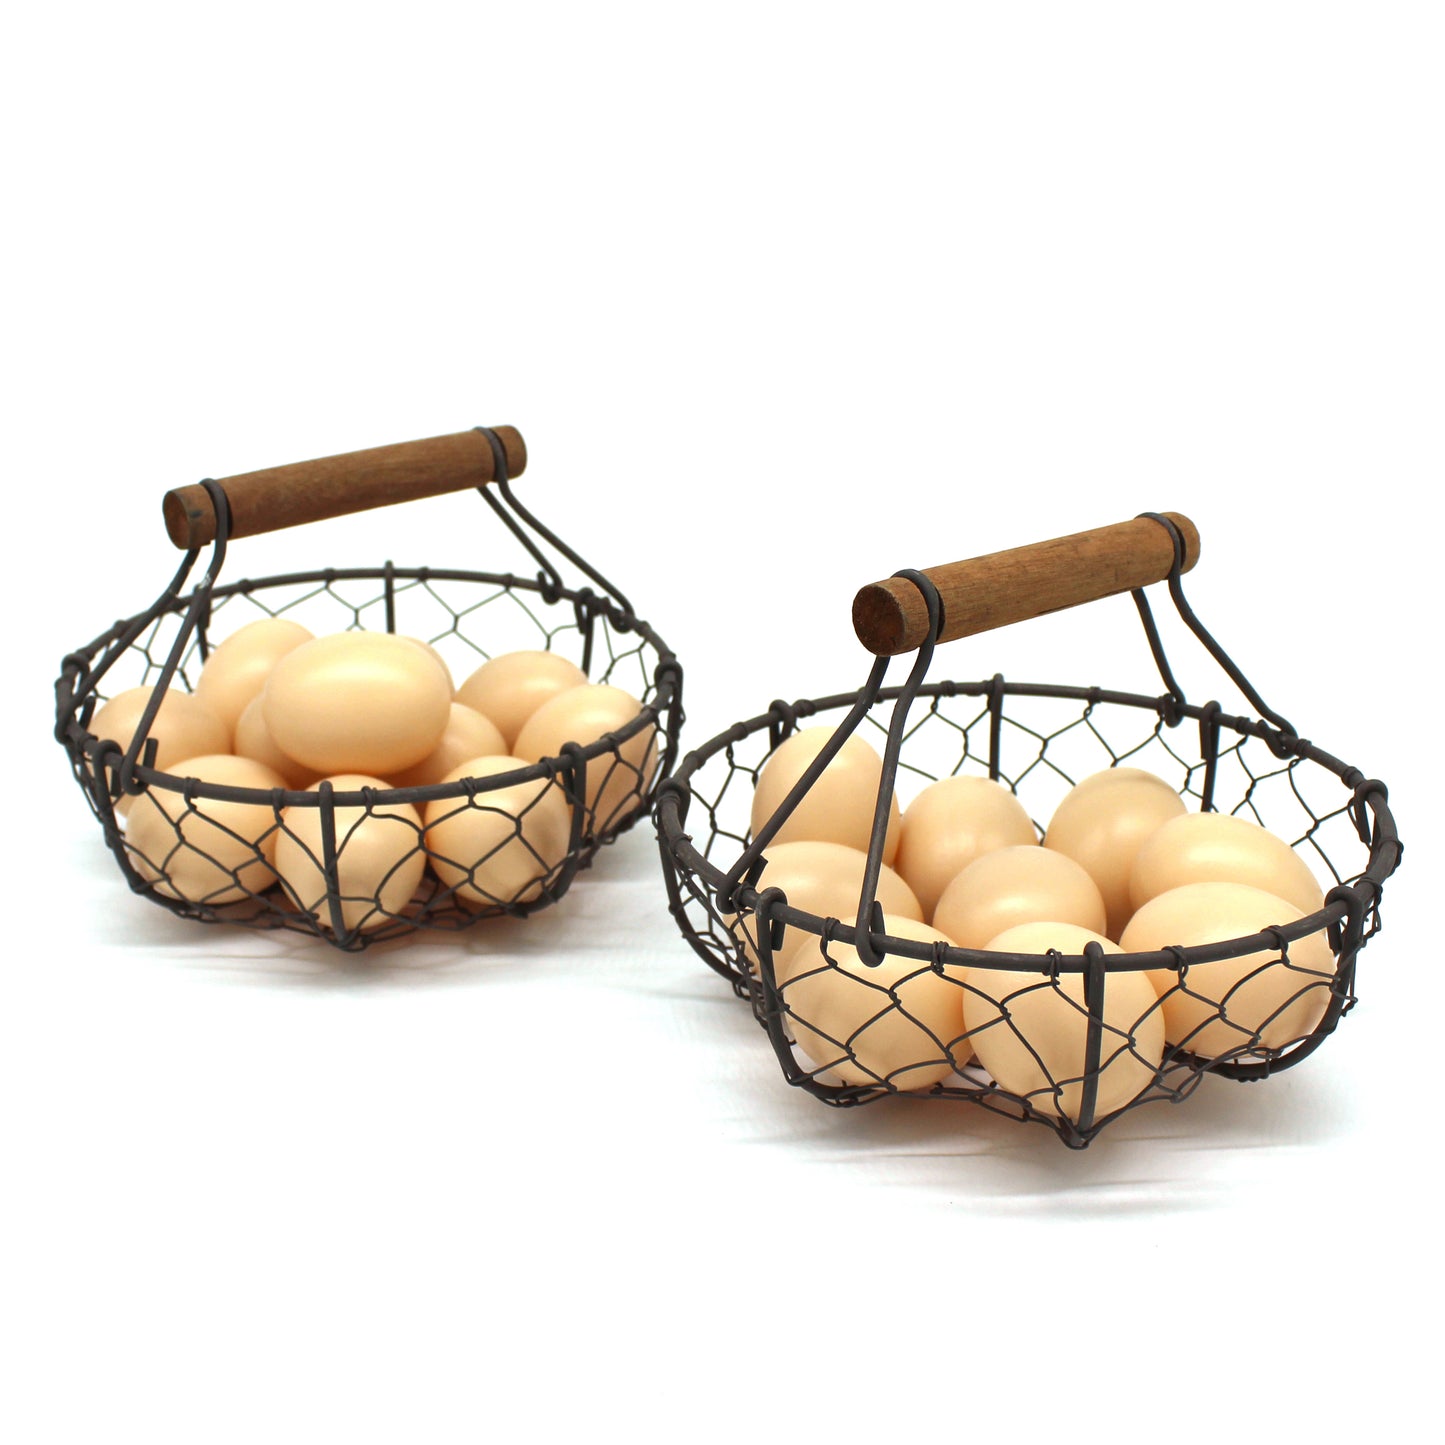 CVHOMEDECO. Round Chicken Wire Egg Baskets Rust Gathering Baskets with Wooden Handle Country Vintage Style Storage Baskets. Set of 2